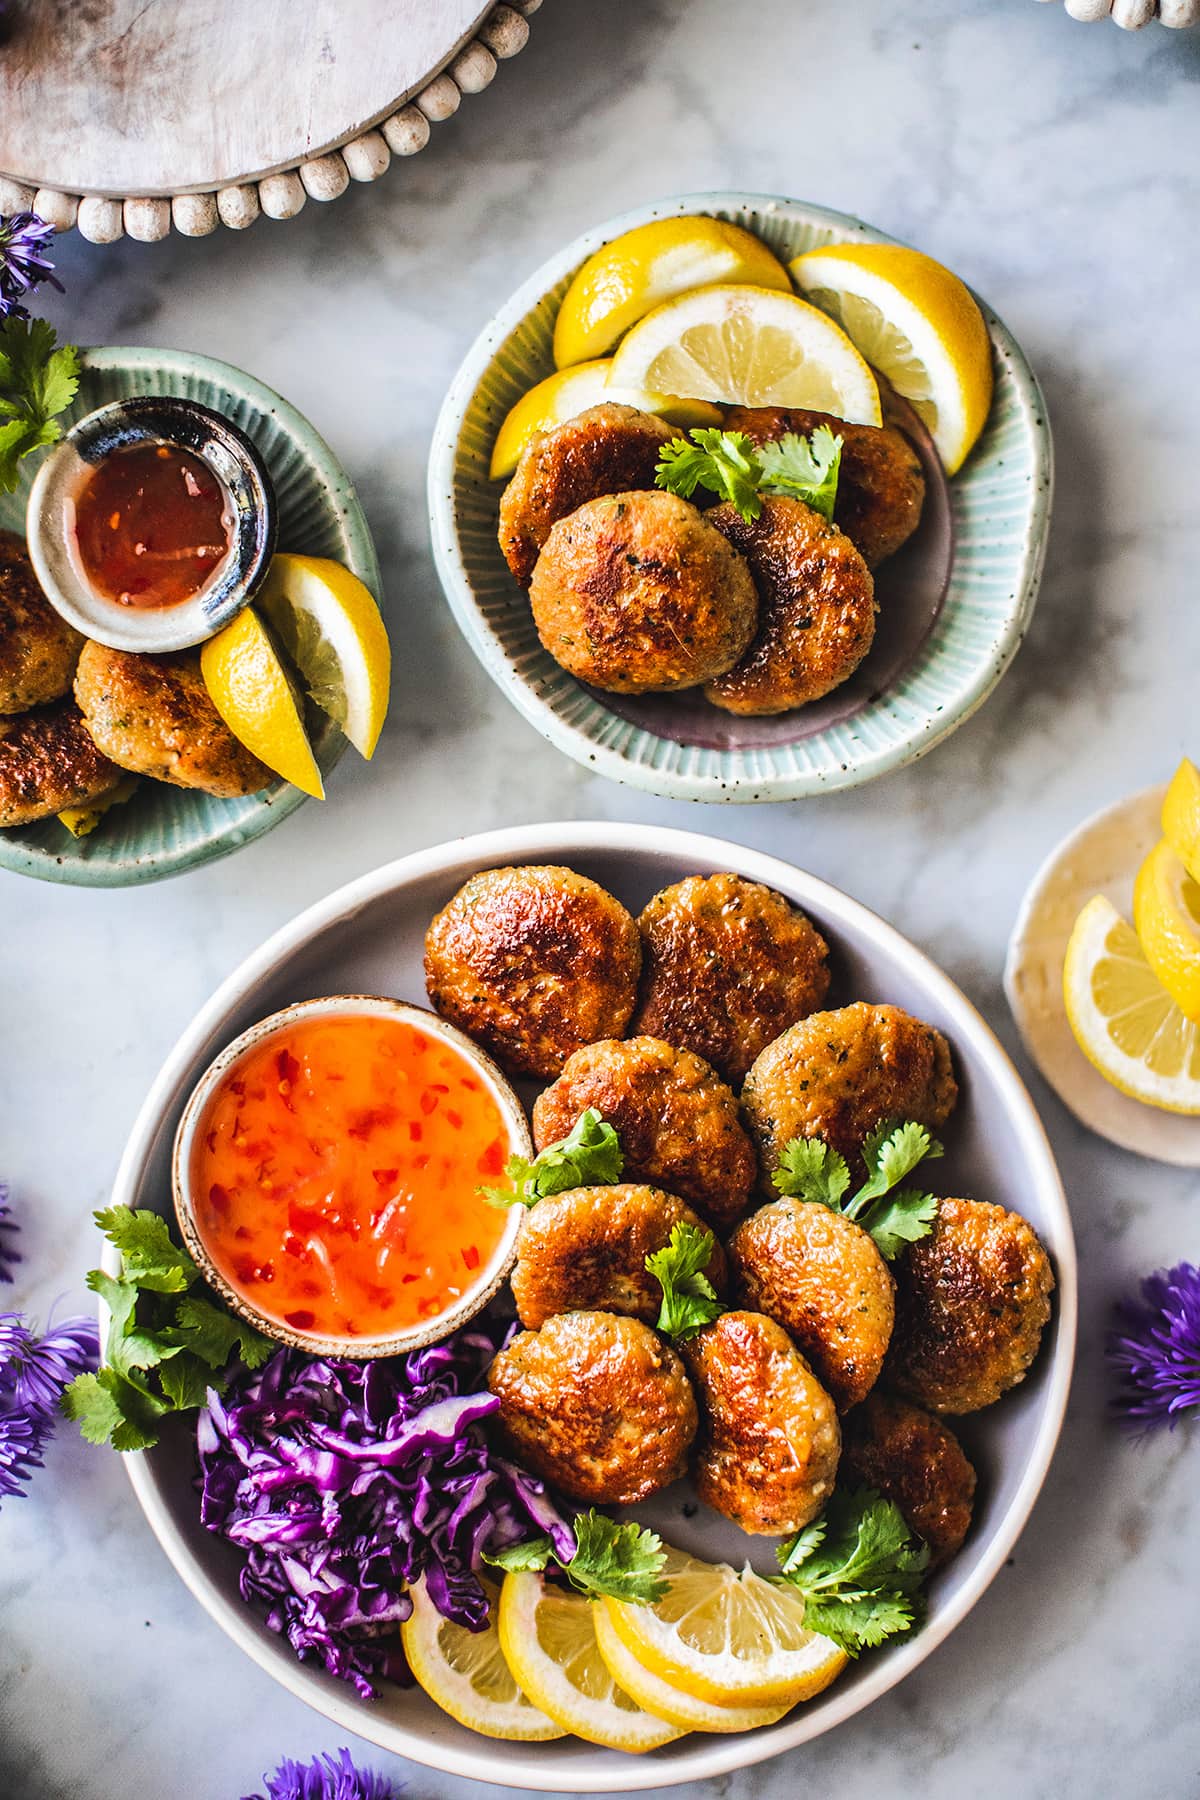 Thai shrimp cakes on platters with chili sauce on the side.